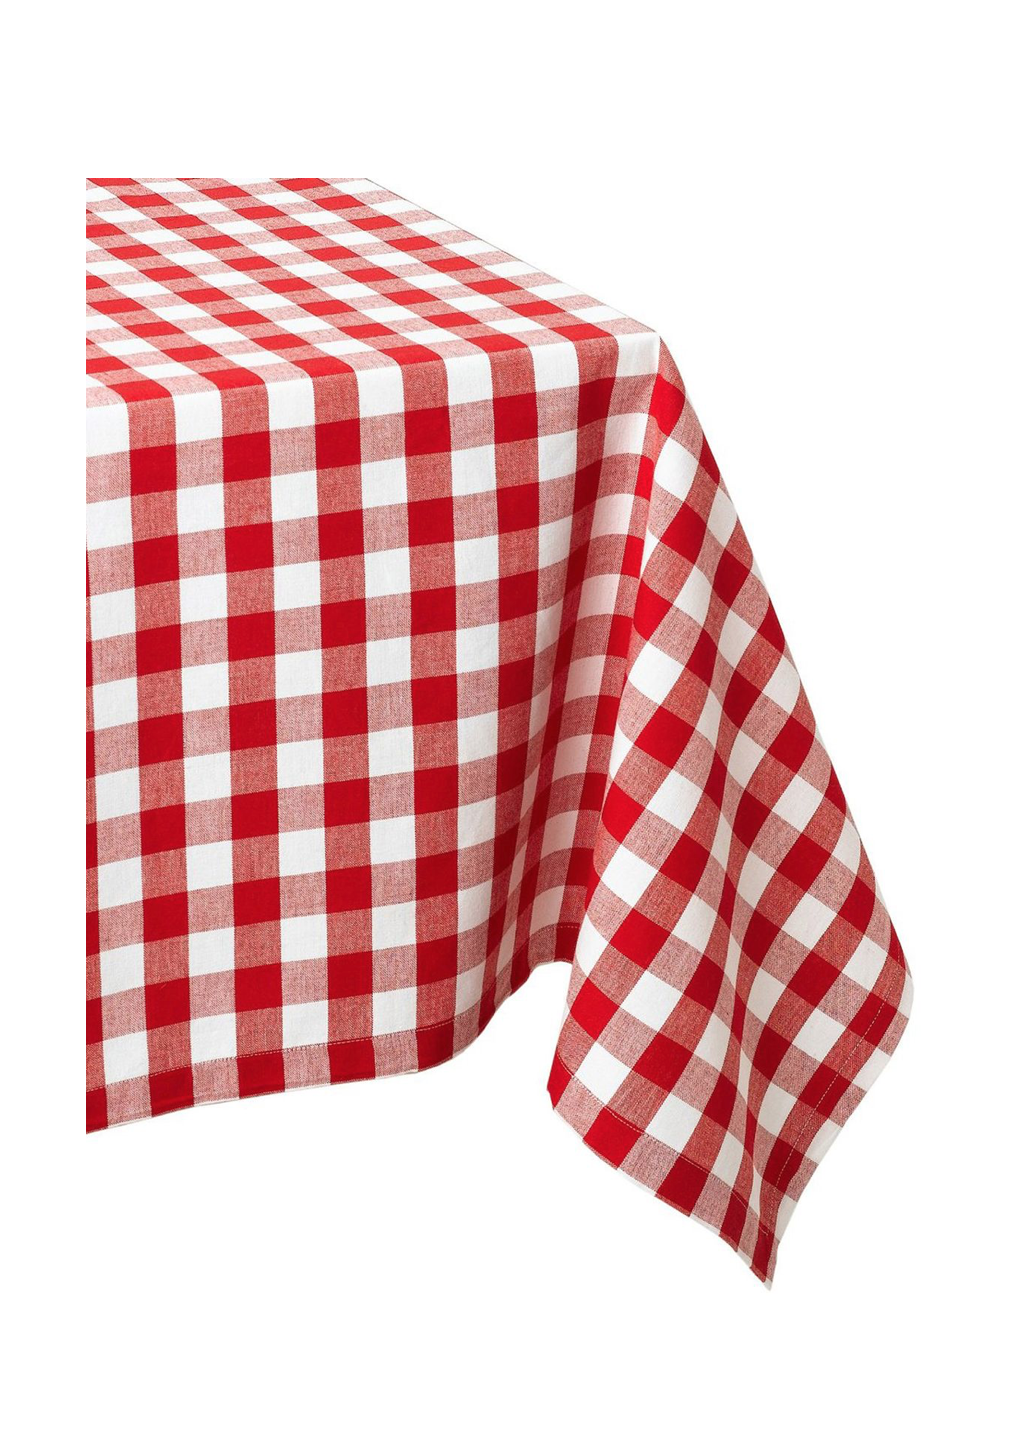 Red White Grid Table Cloth